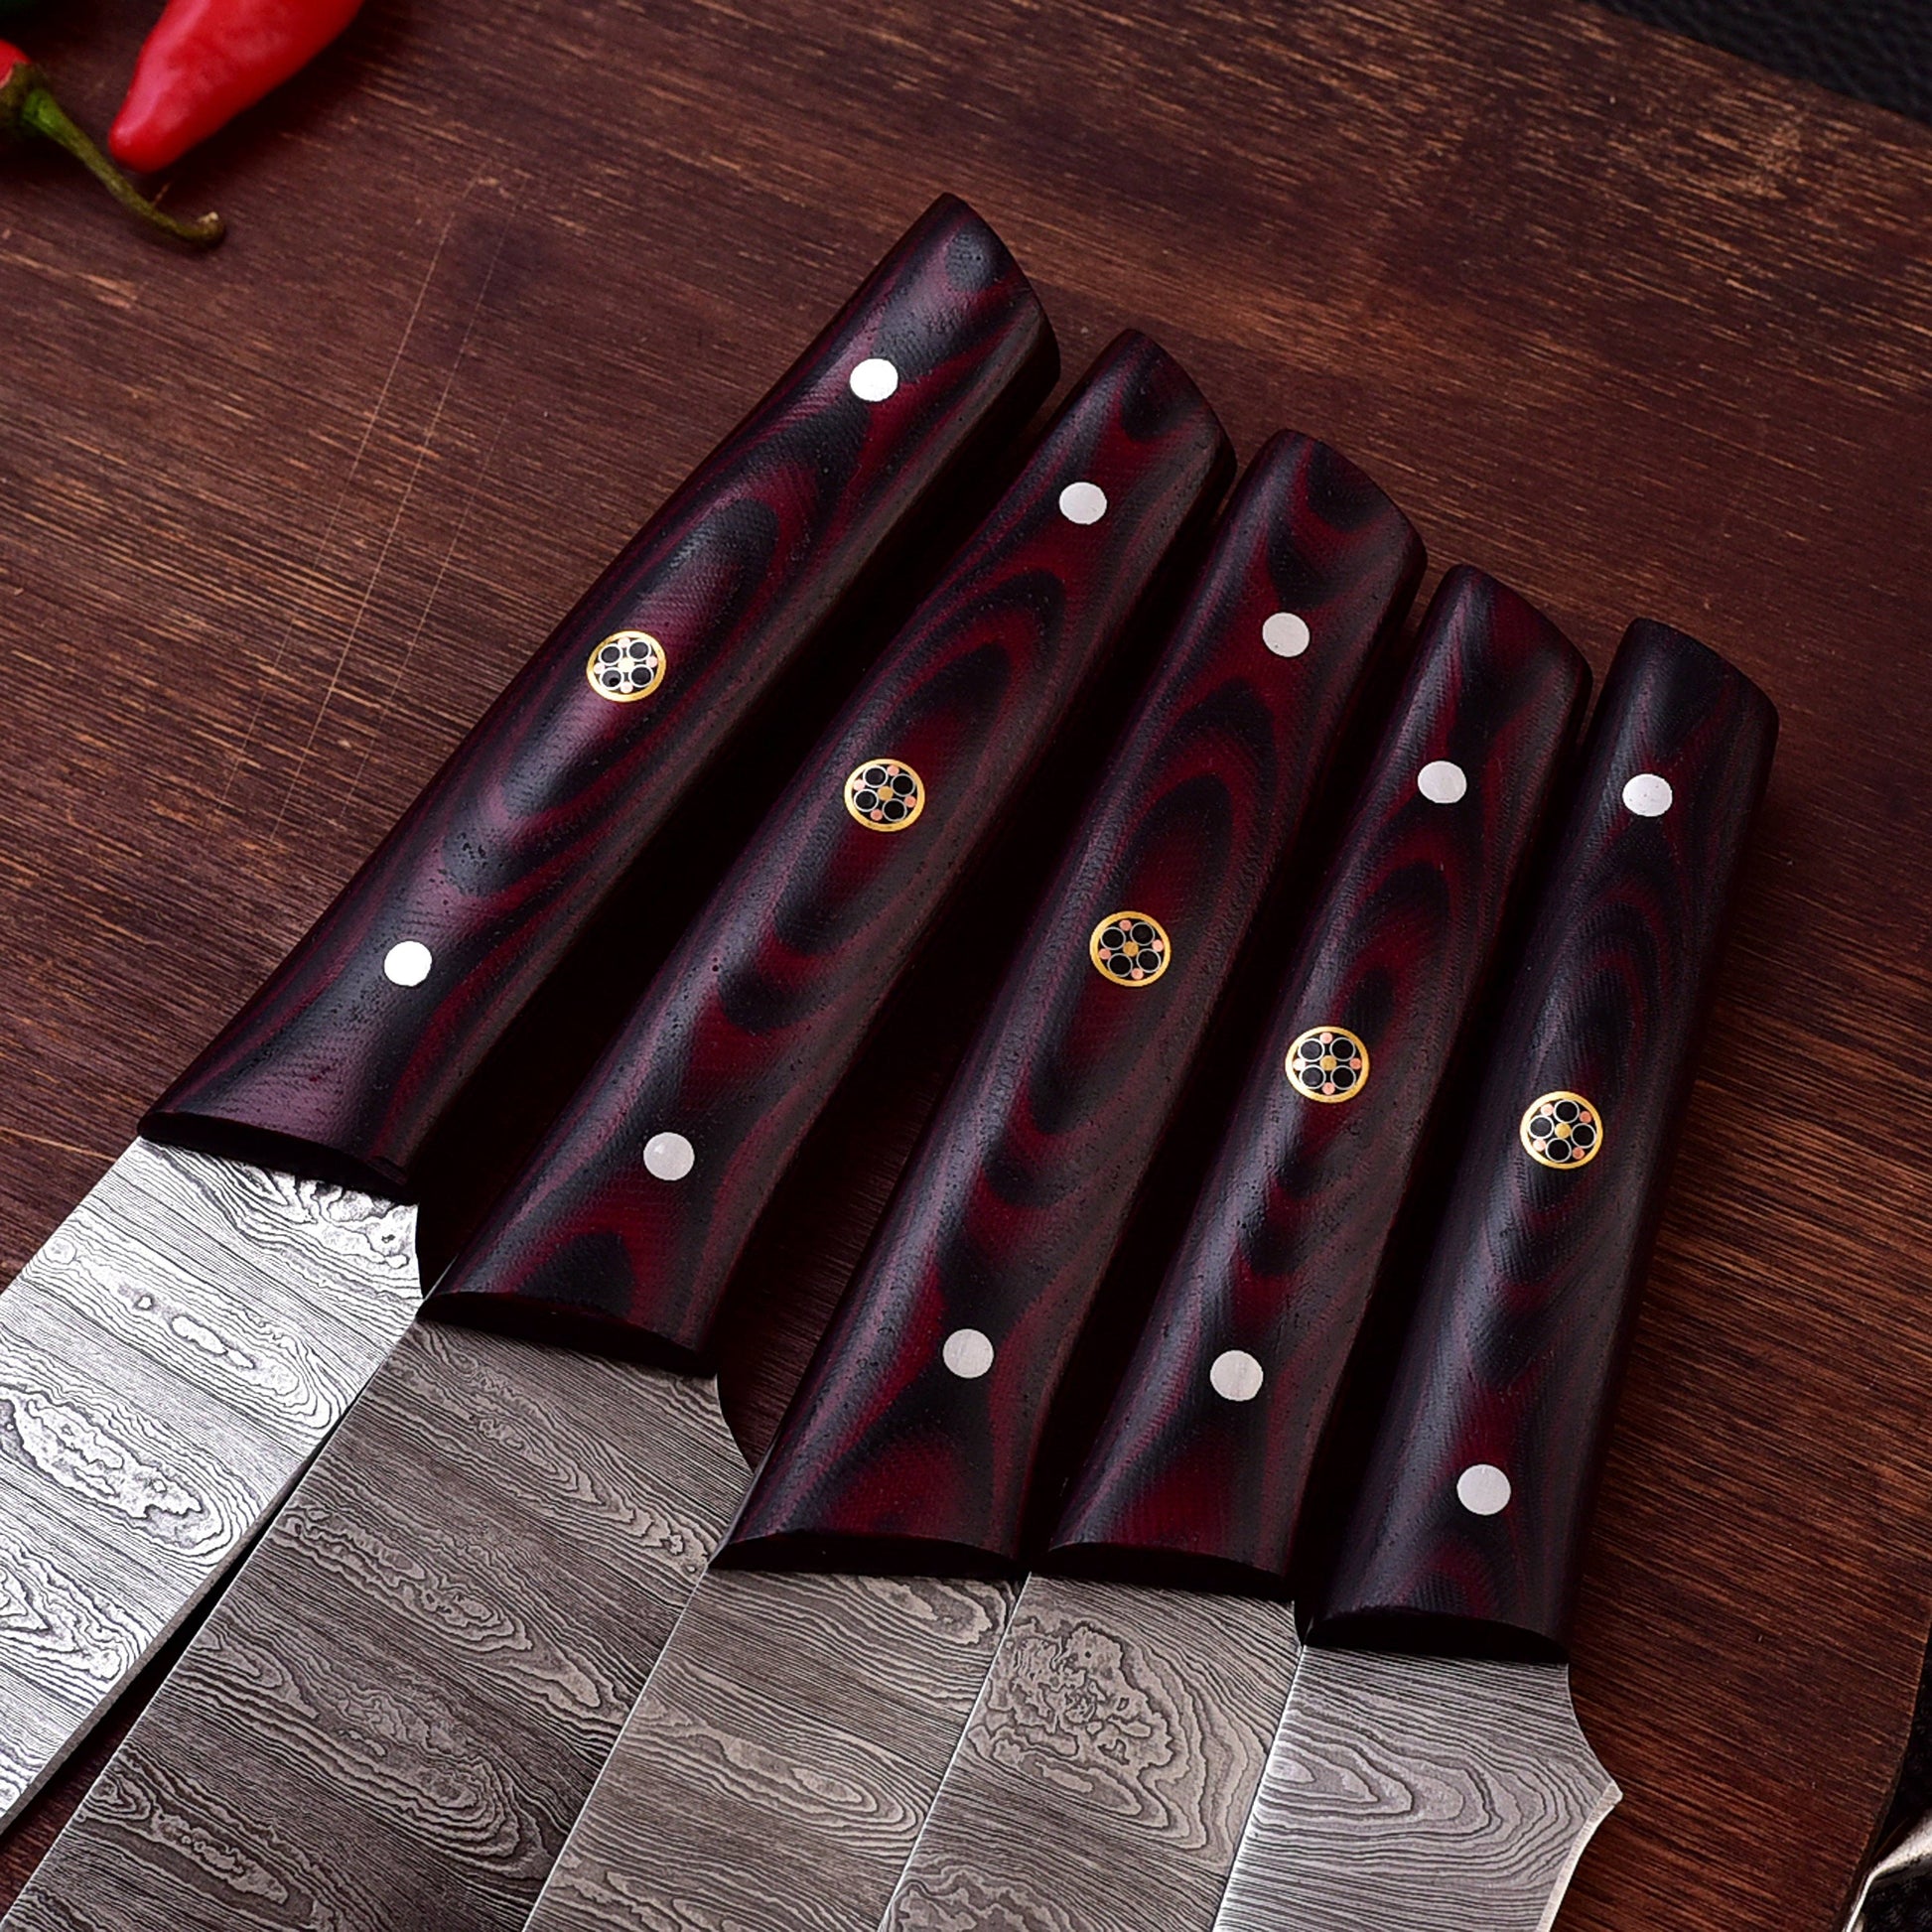 Damascus Steel 5pc Cooking Knife Set - BBQ Indoor/Outdoor Kitchen Knives, Chef Santoku Utility Knife, Handmade Camping Damascus Blade